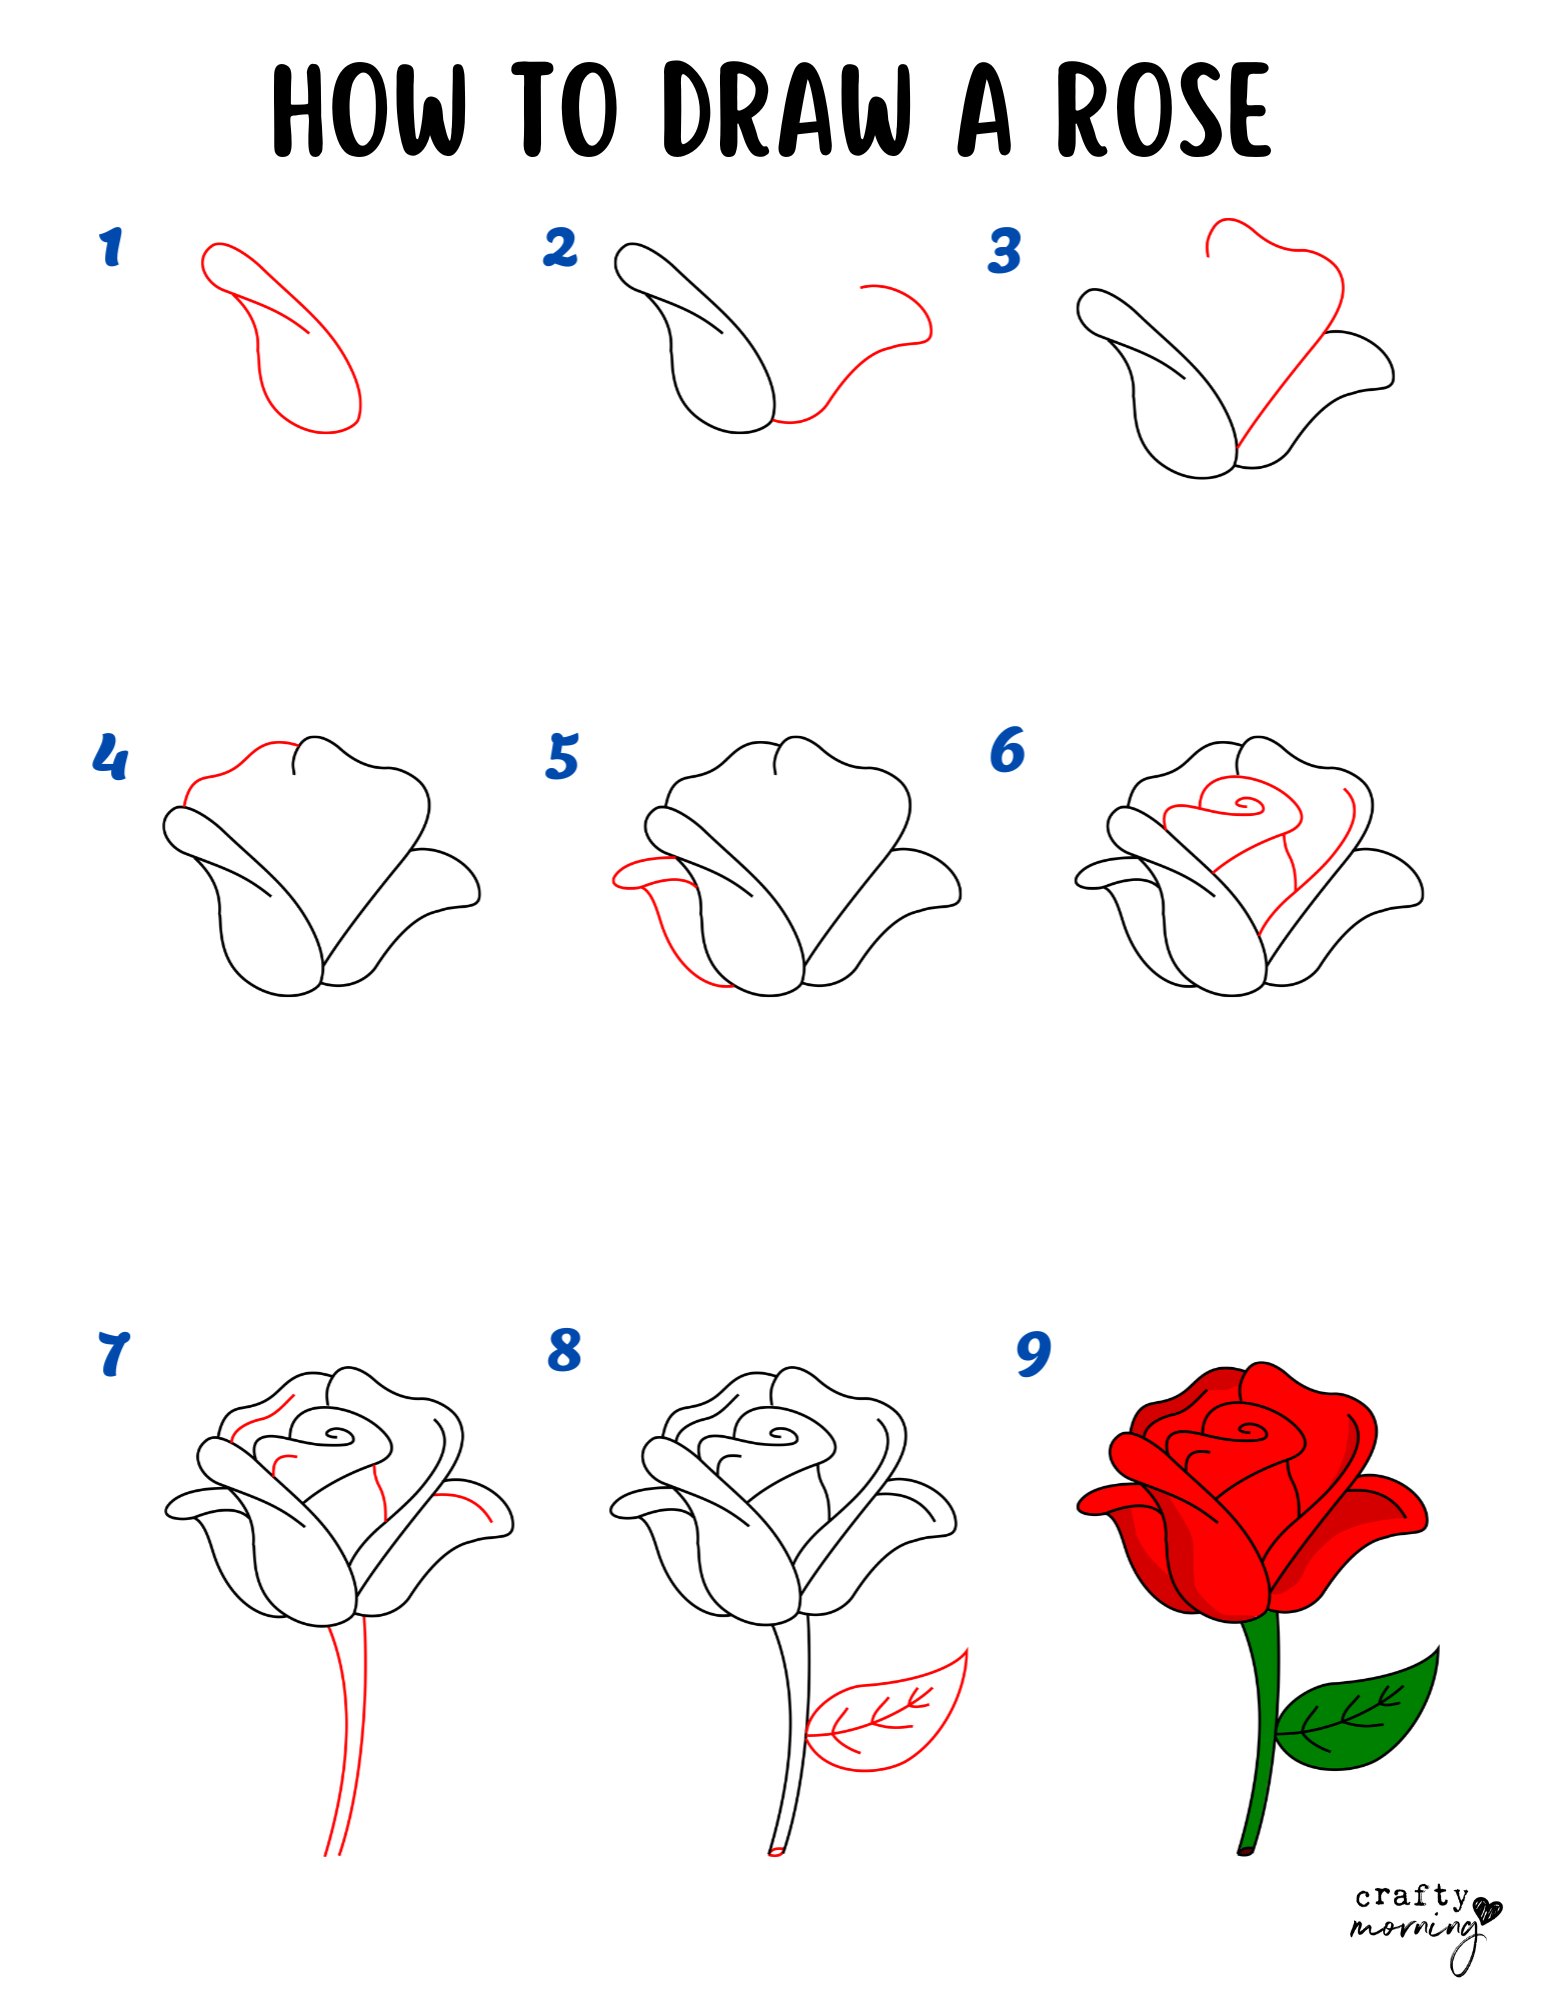 How to Draw a Rose Step by Step (Easy) Crafty Morning